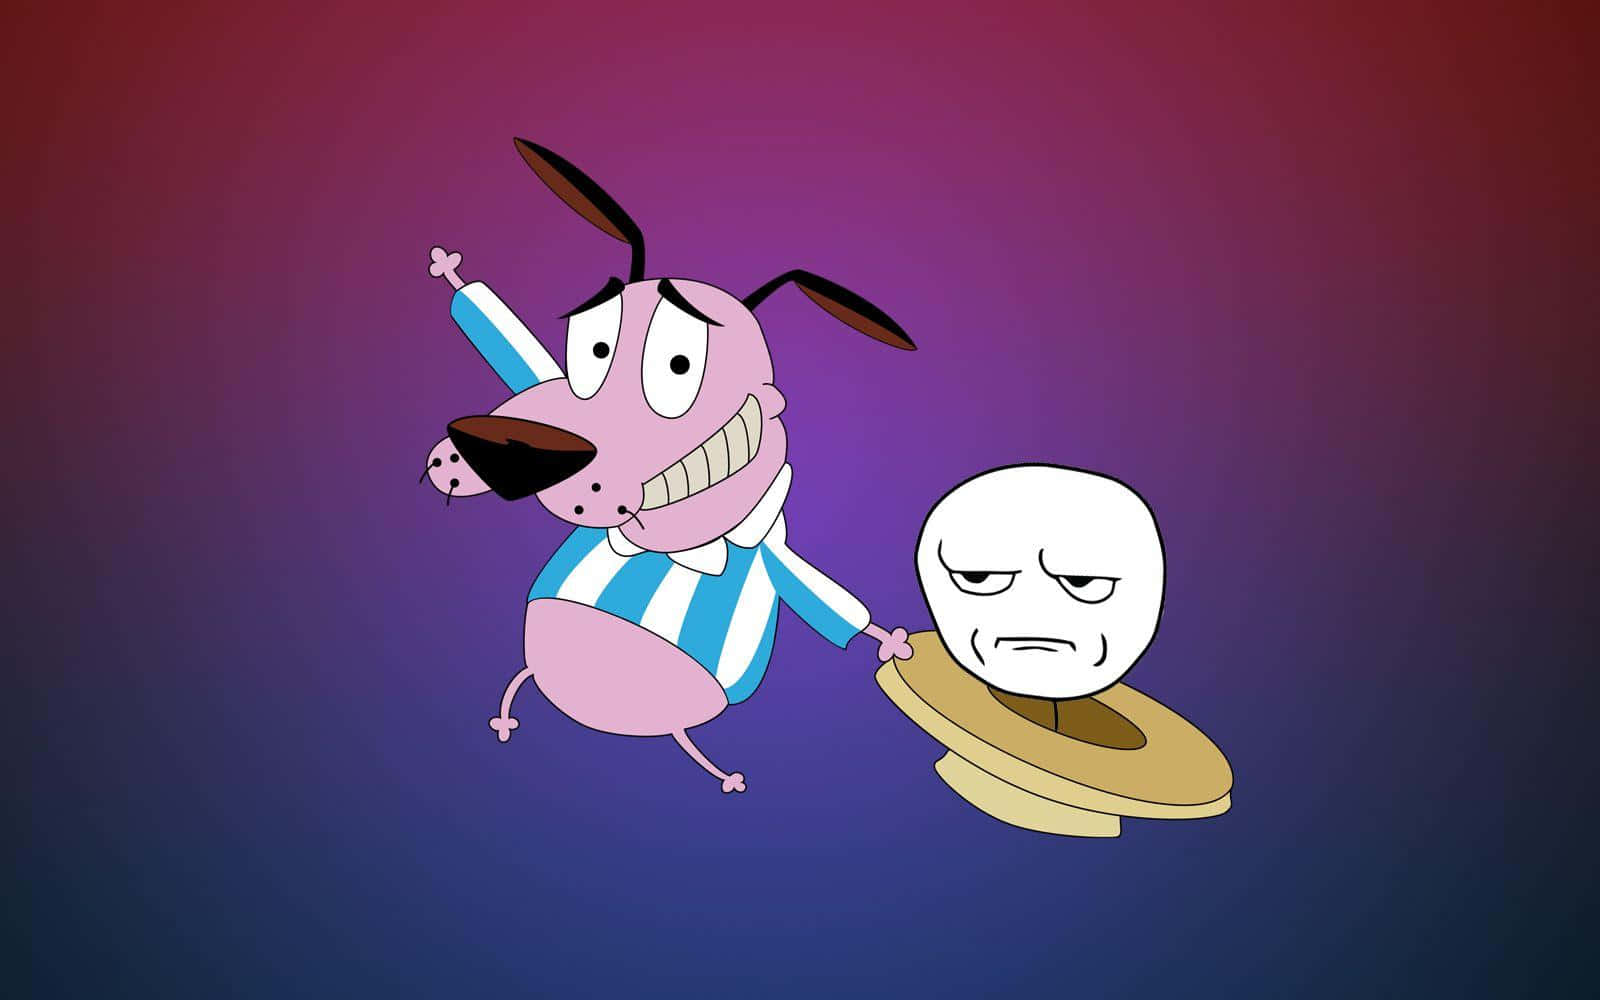 Courage The Cowardly Dog Teaches Us That Courage Is The Key To Overcoming Any Challenge. Wallpaper